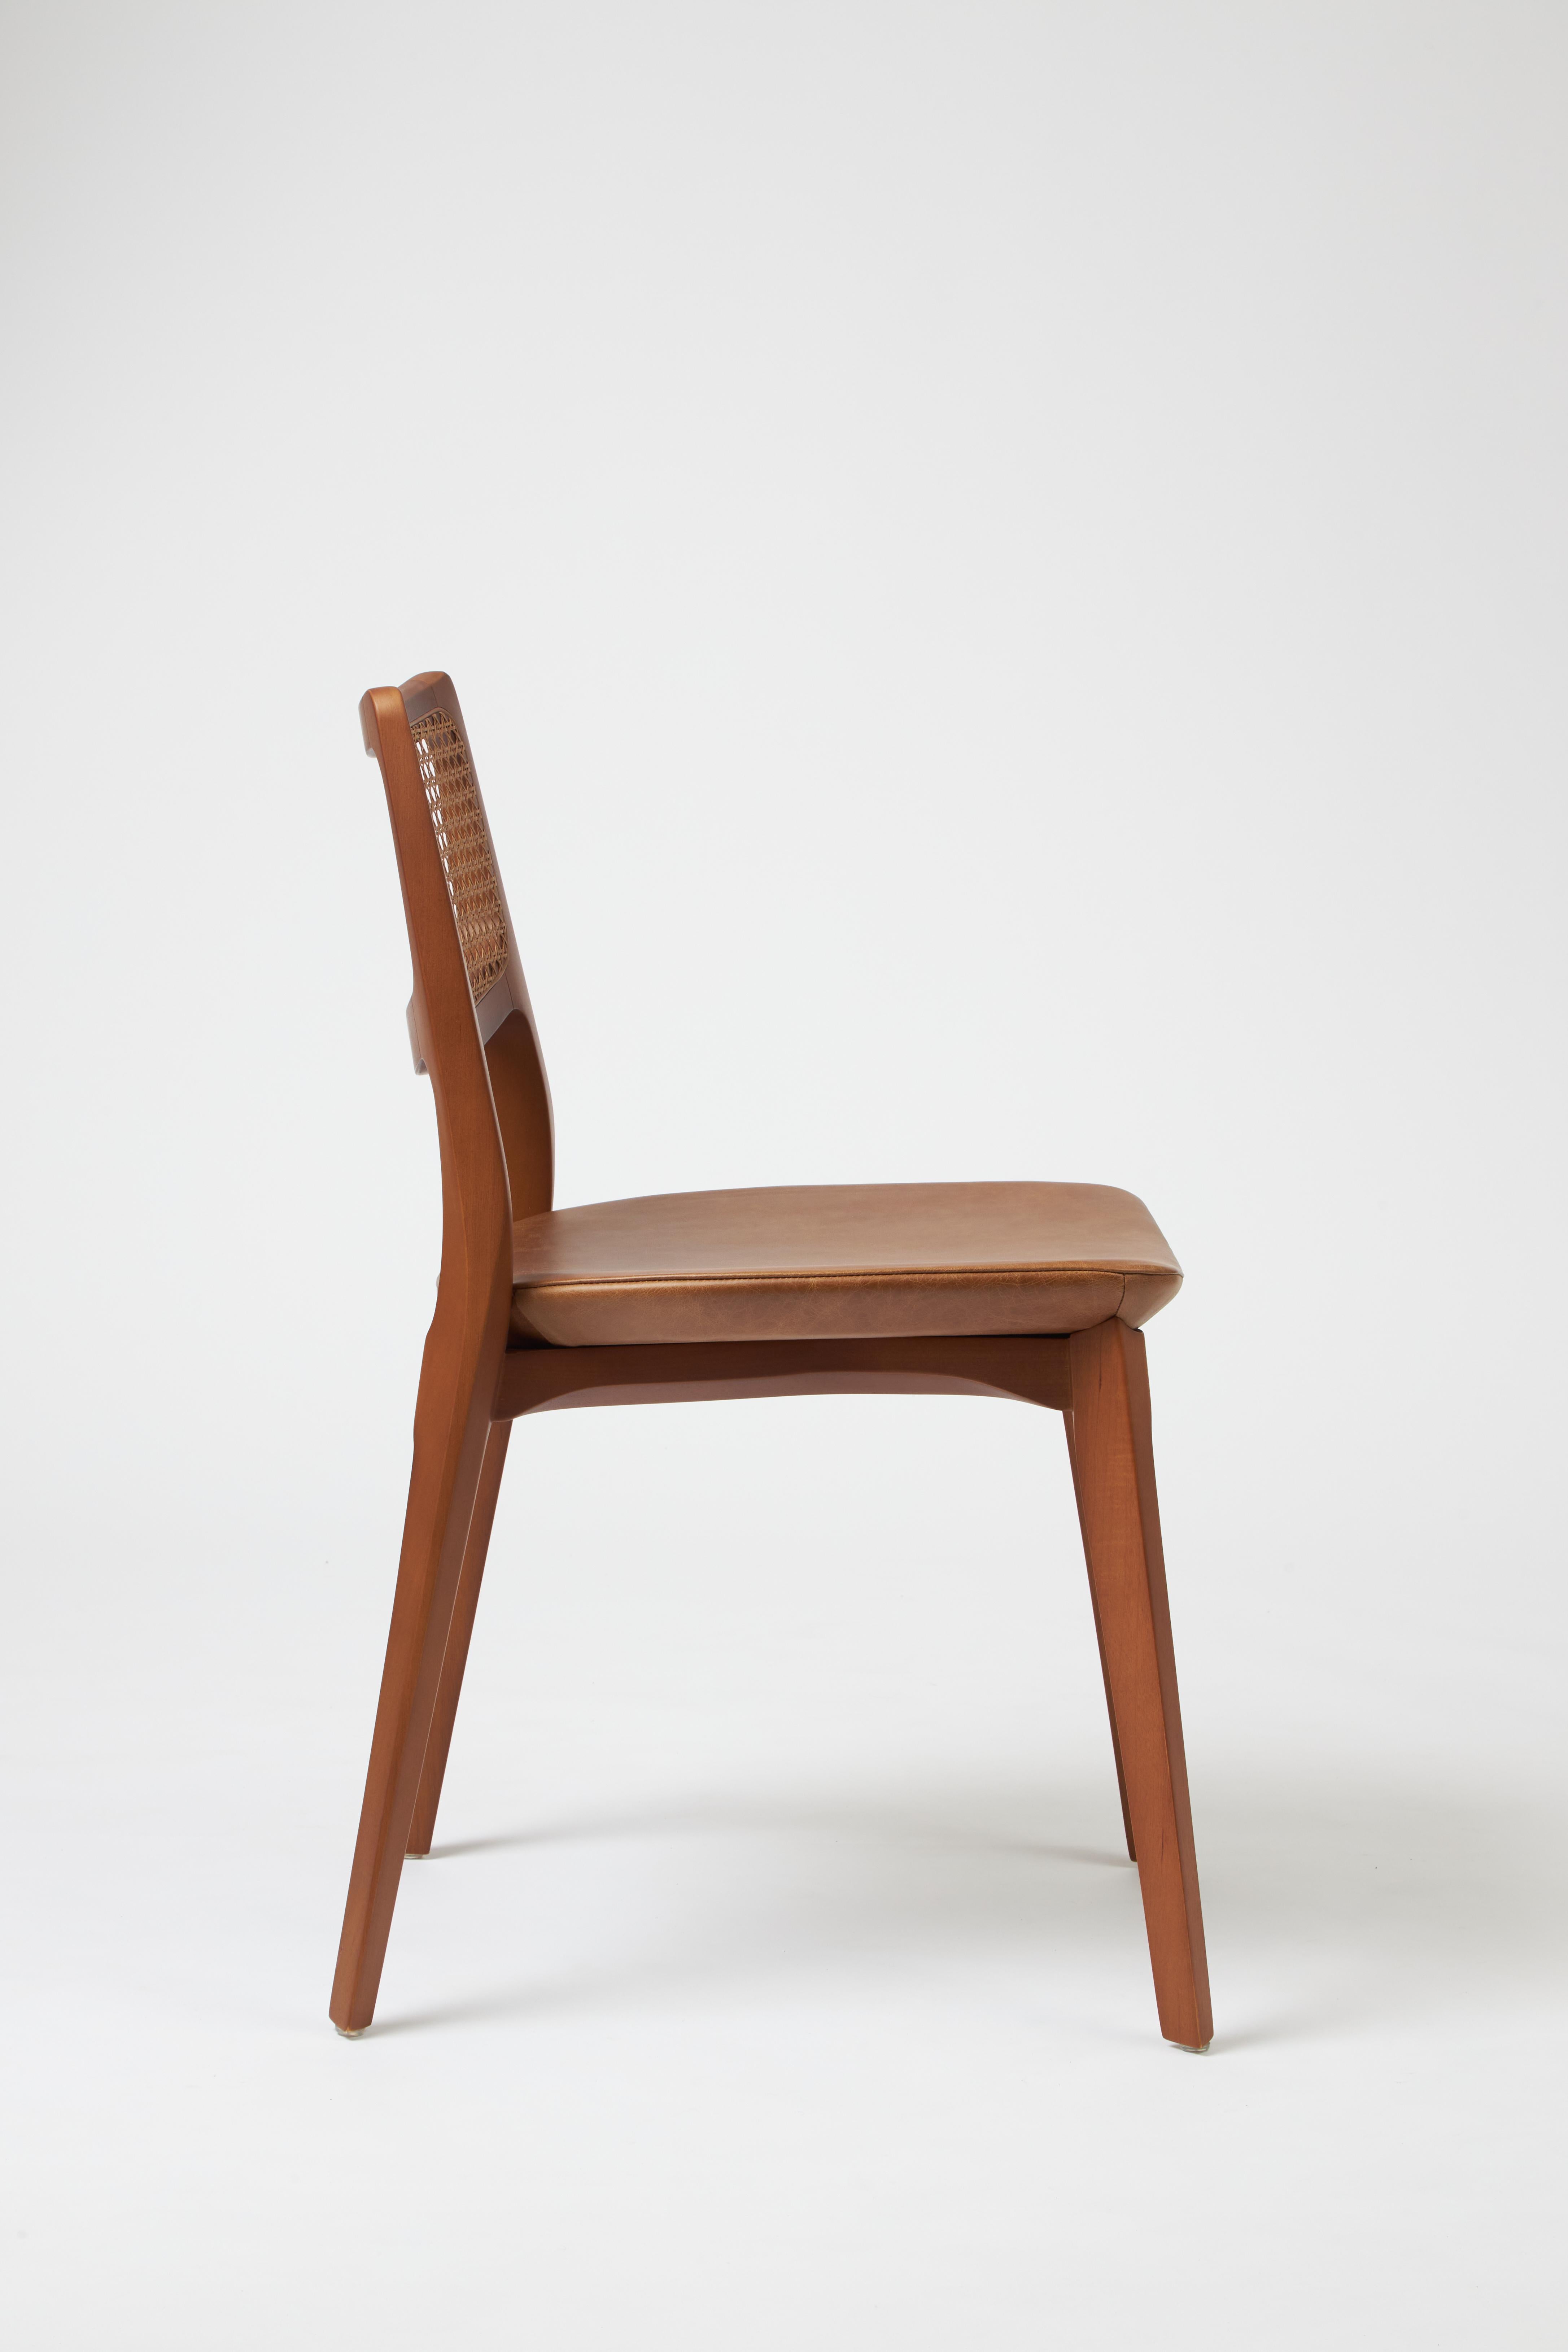 Post-Modern Modern Style Aurora Chair Sculpted in Walnut Finish No Arms, leather seating For Sale